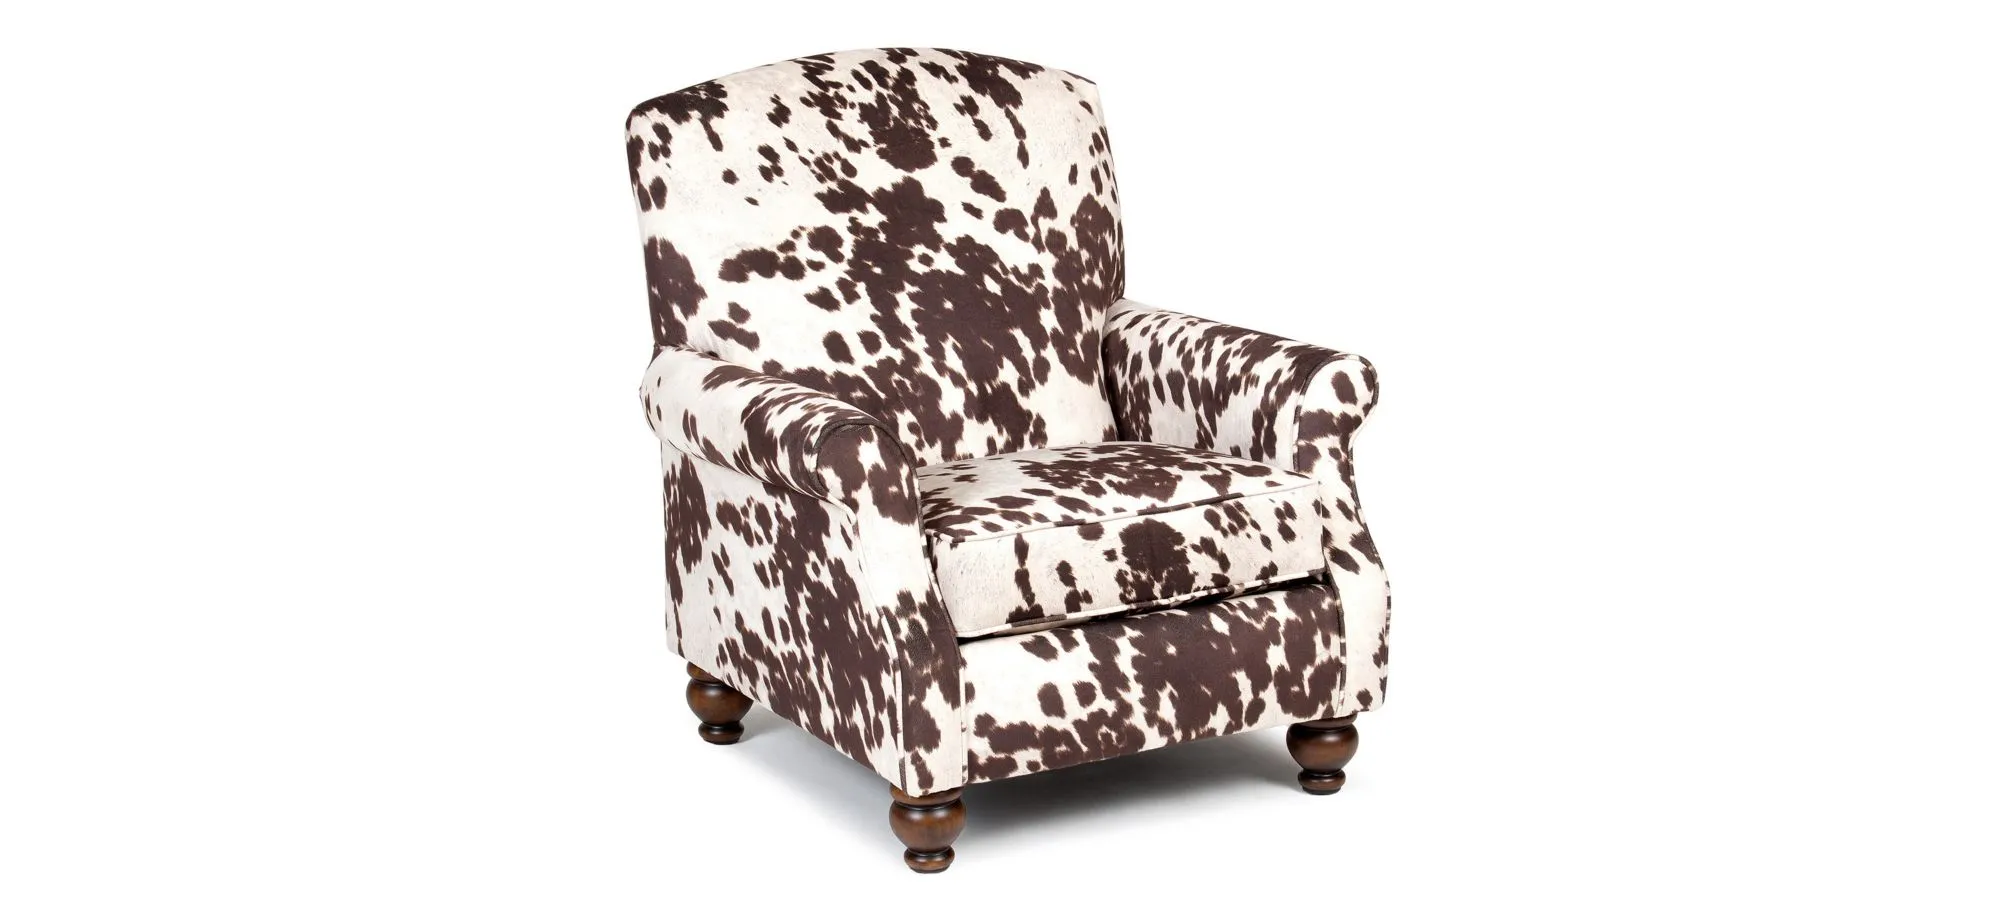 Ann Accent Chair in Udder Madness Milk by Chairs America